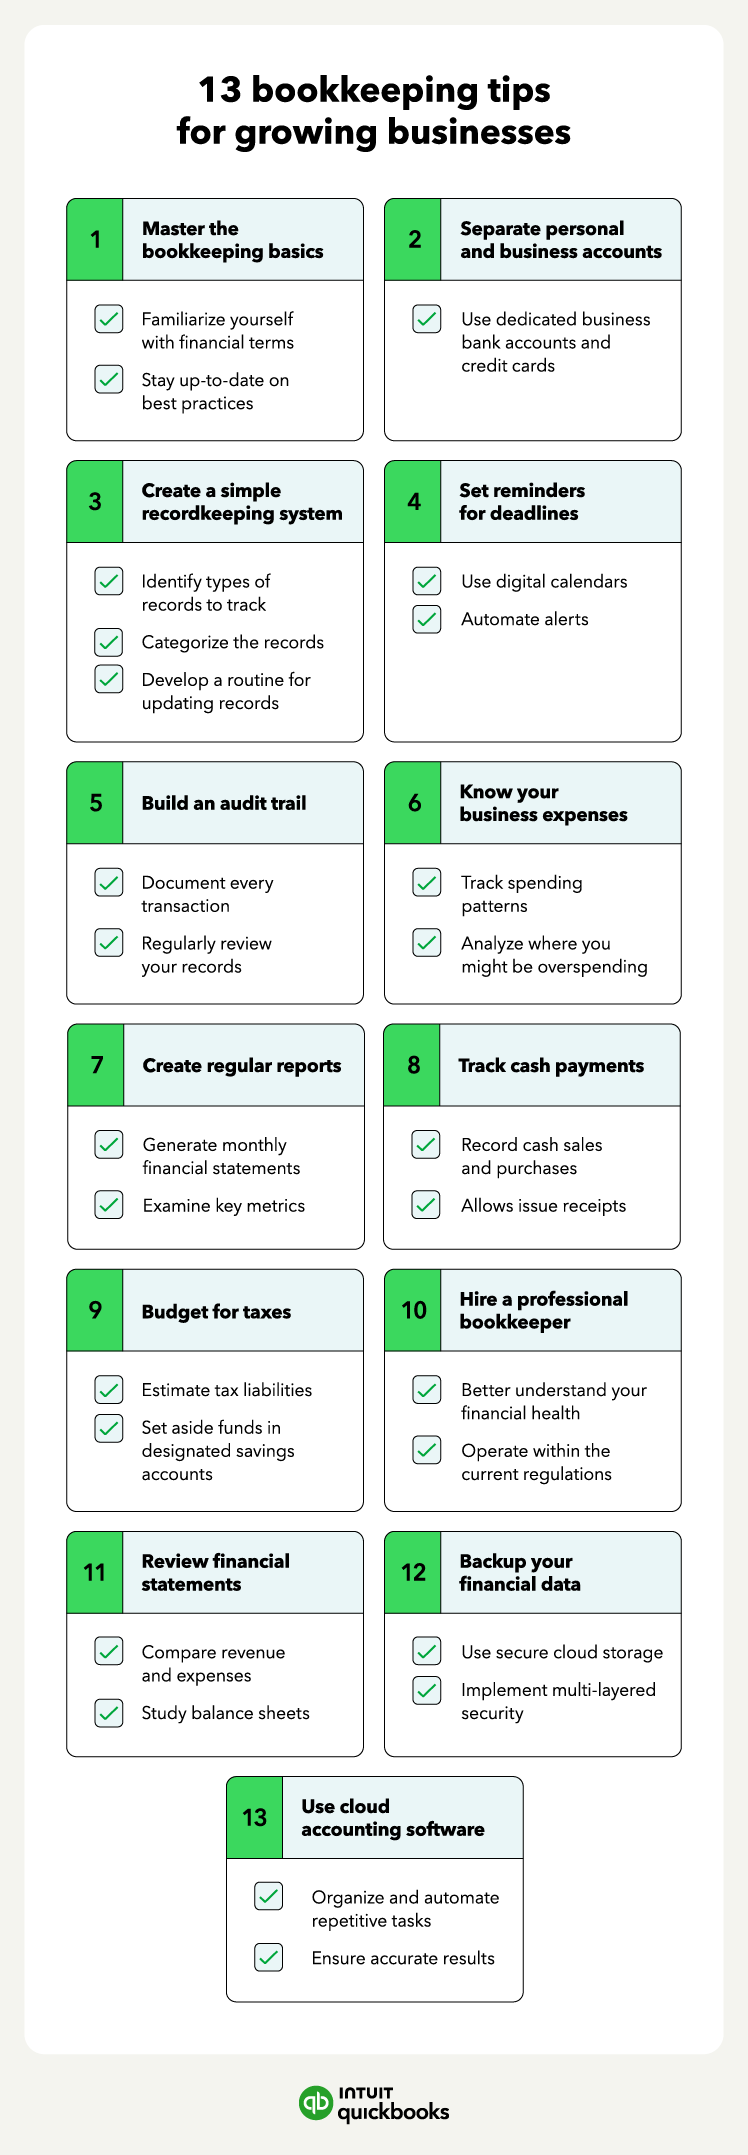 A checklist summarizes 13 bookkeeping tips along with notable steps.